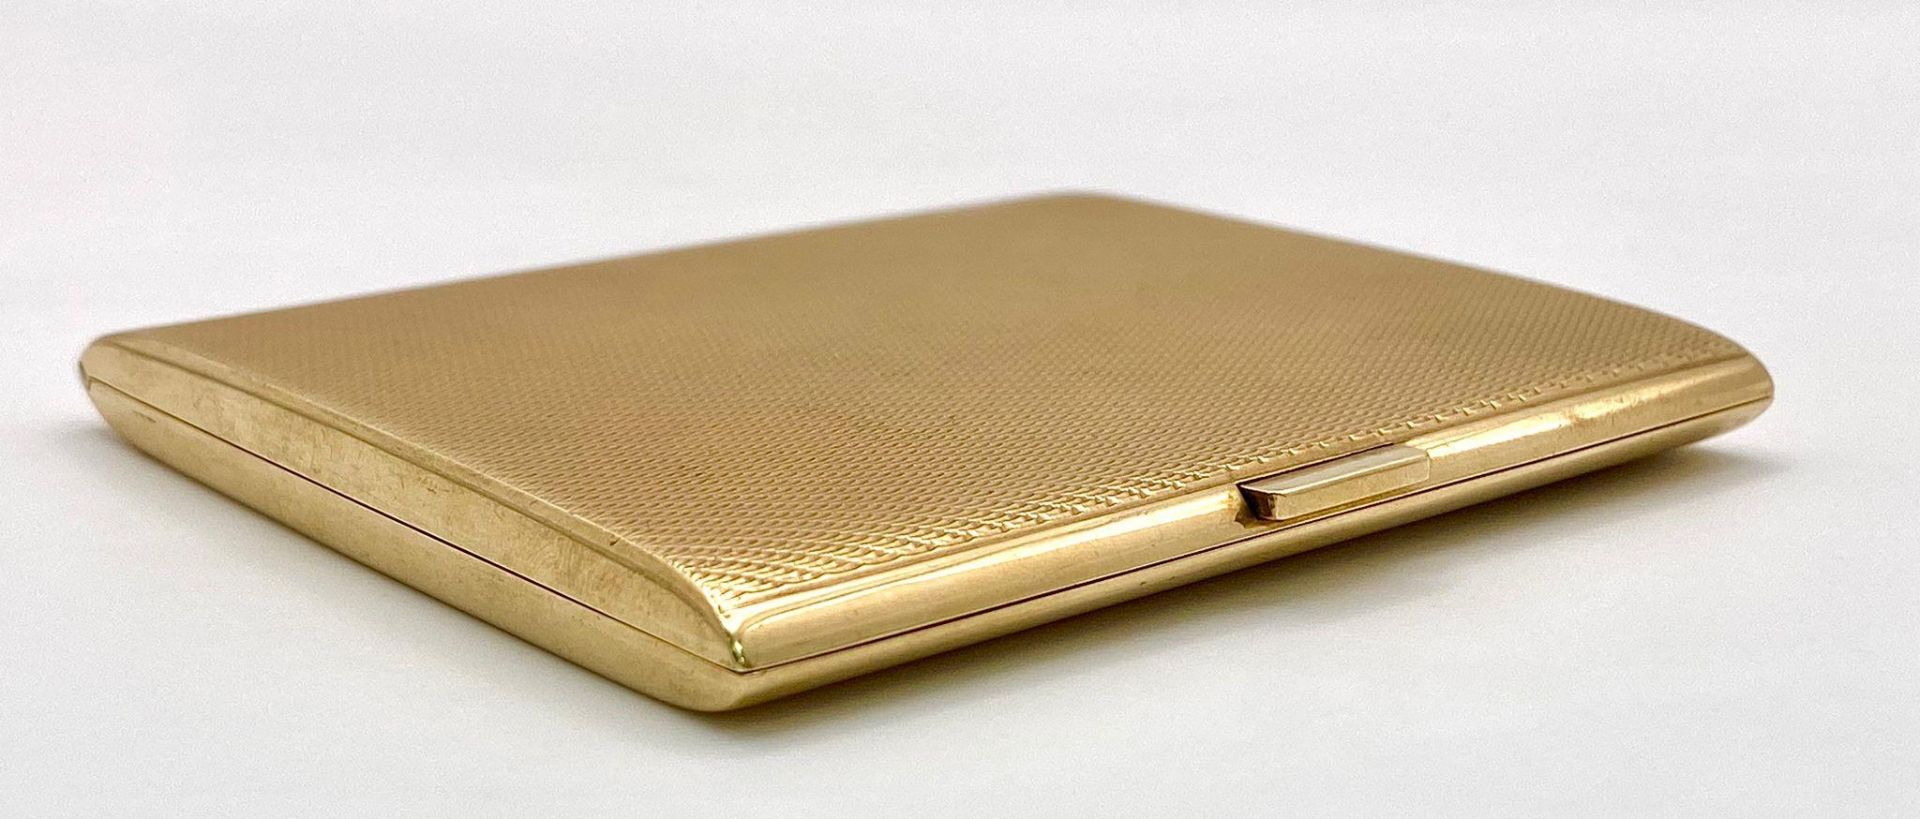 A Vintage 9K Yellow Solid Gold Cigarette Case. 8cm x 7.5cm. 72.9g weight. Full UK hallmarks. - Image 2 of 7